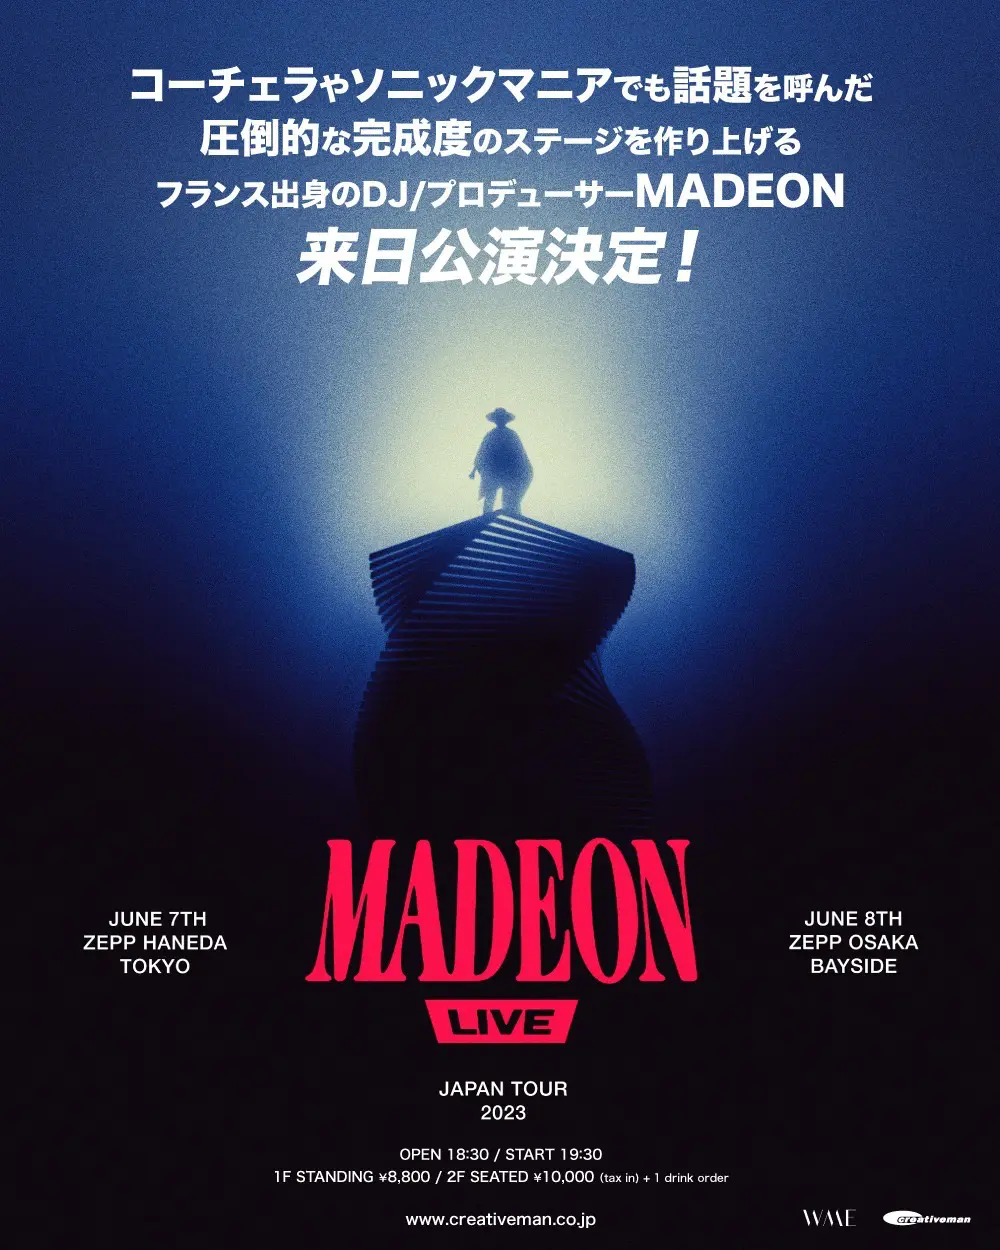 【Performance Ended】SARUKANI Confirmed as Guest Performer for MADEON JAPAN TOUR 2023 Osaka Show!